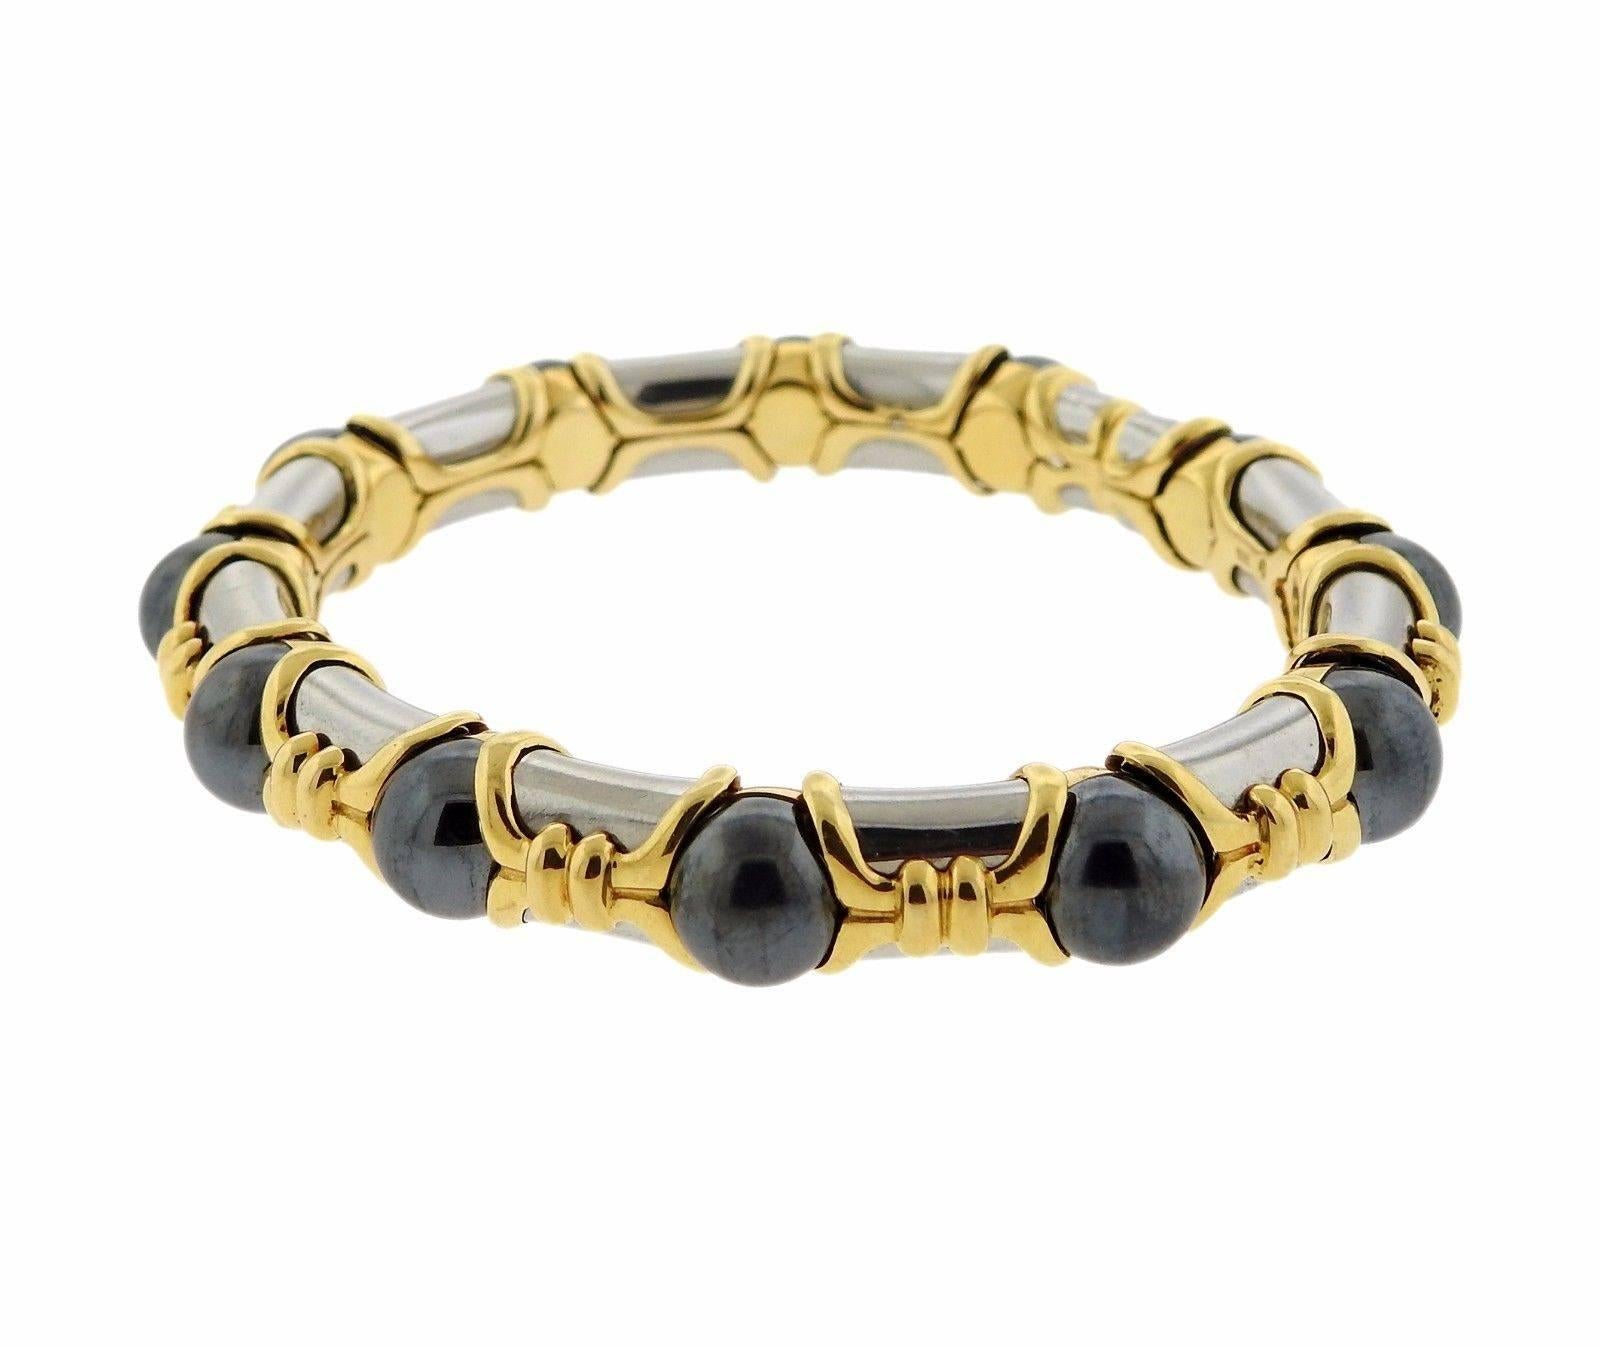 An 18k yellow gold and stainless steel bracelet set with 8.4mm hematite stones.  The bracelet will fit up to a 6 3/4" wrist.  Marked: 1998,  Bvlgari, 750, M, 2337AL.  The weight of the piece is 50.7 grams.